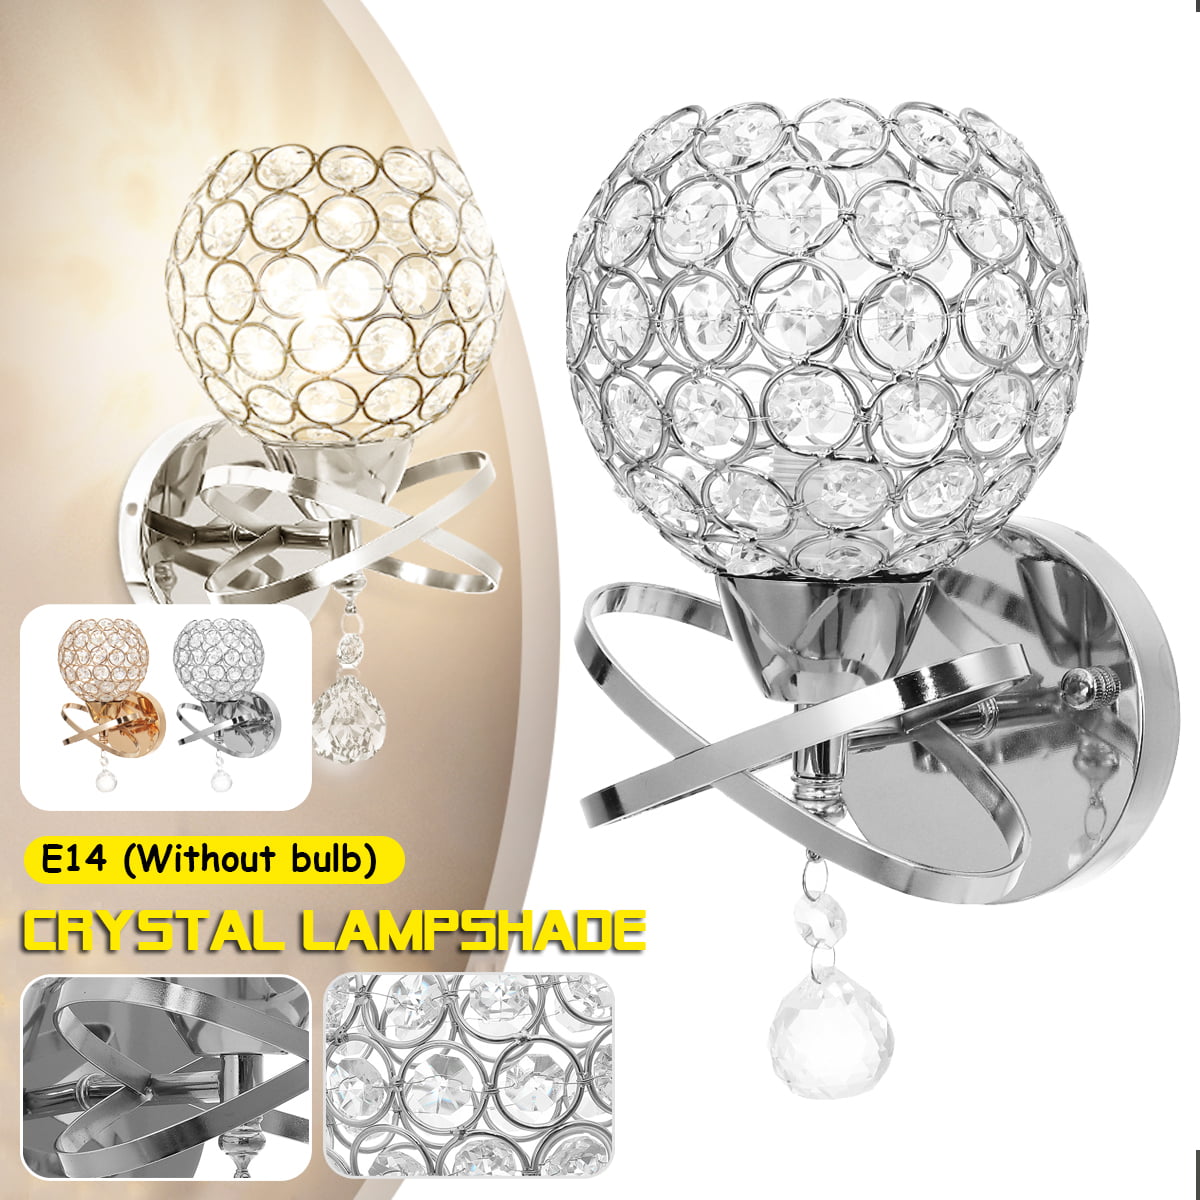 Hallway Large Crystal Wall Lamps Sconce Home LED Fixtures Bedside Wall Lighting 